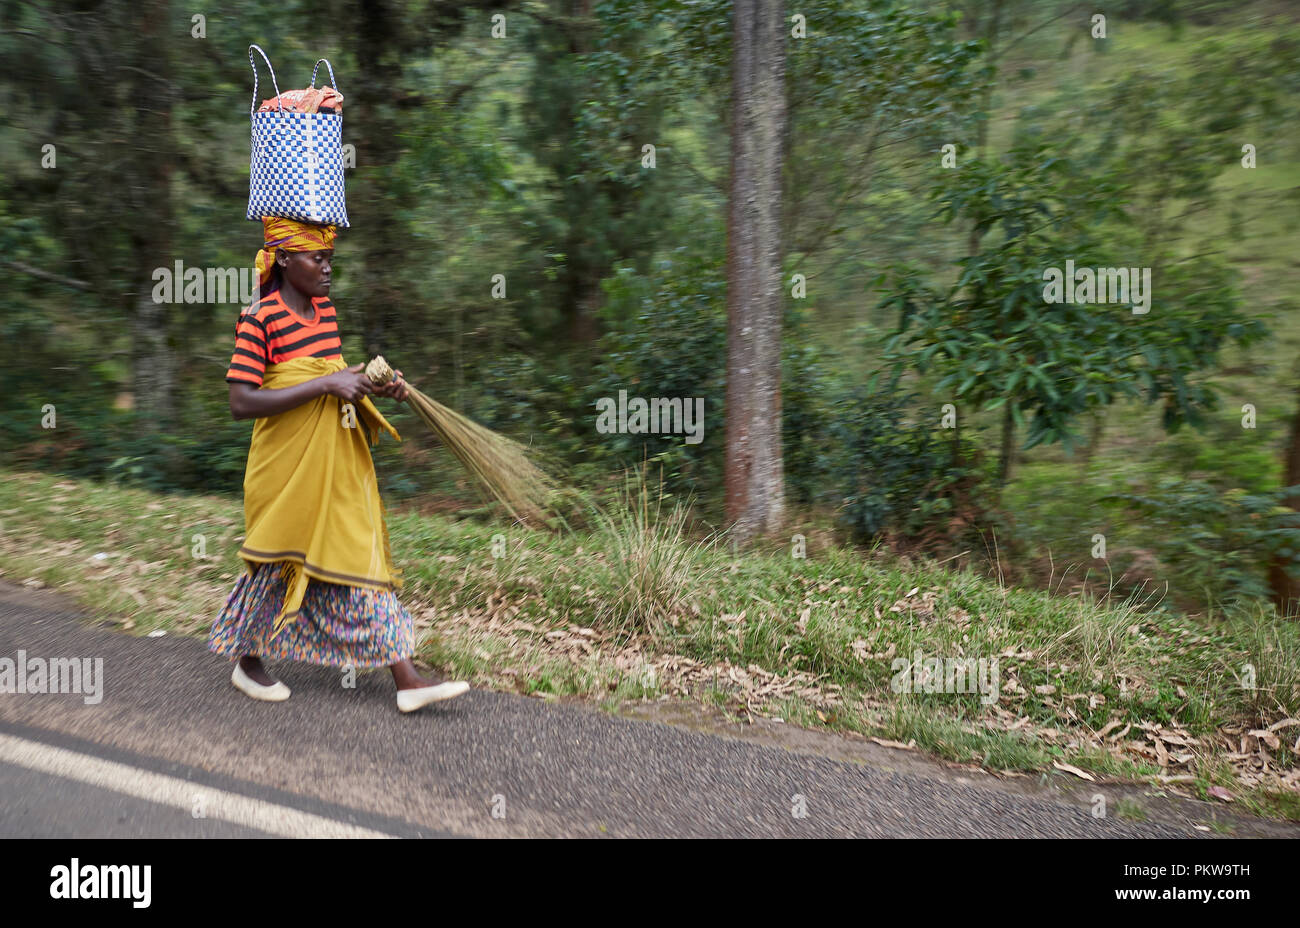 lady walking on the road with a colourful outfit and a bag on her head carring a grass brush/broom Stock Photo